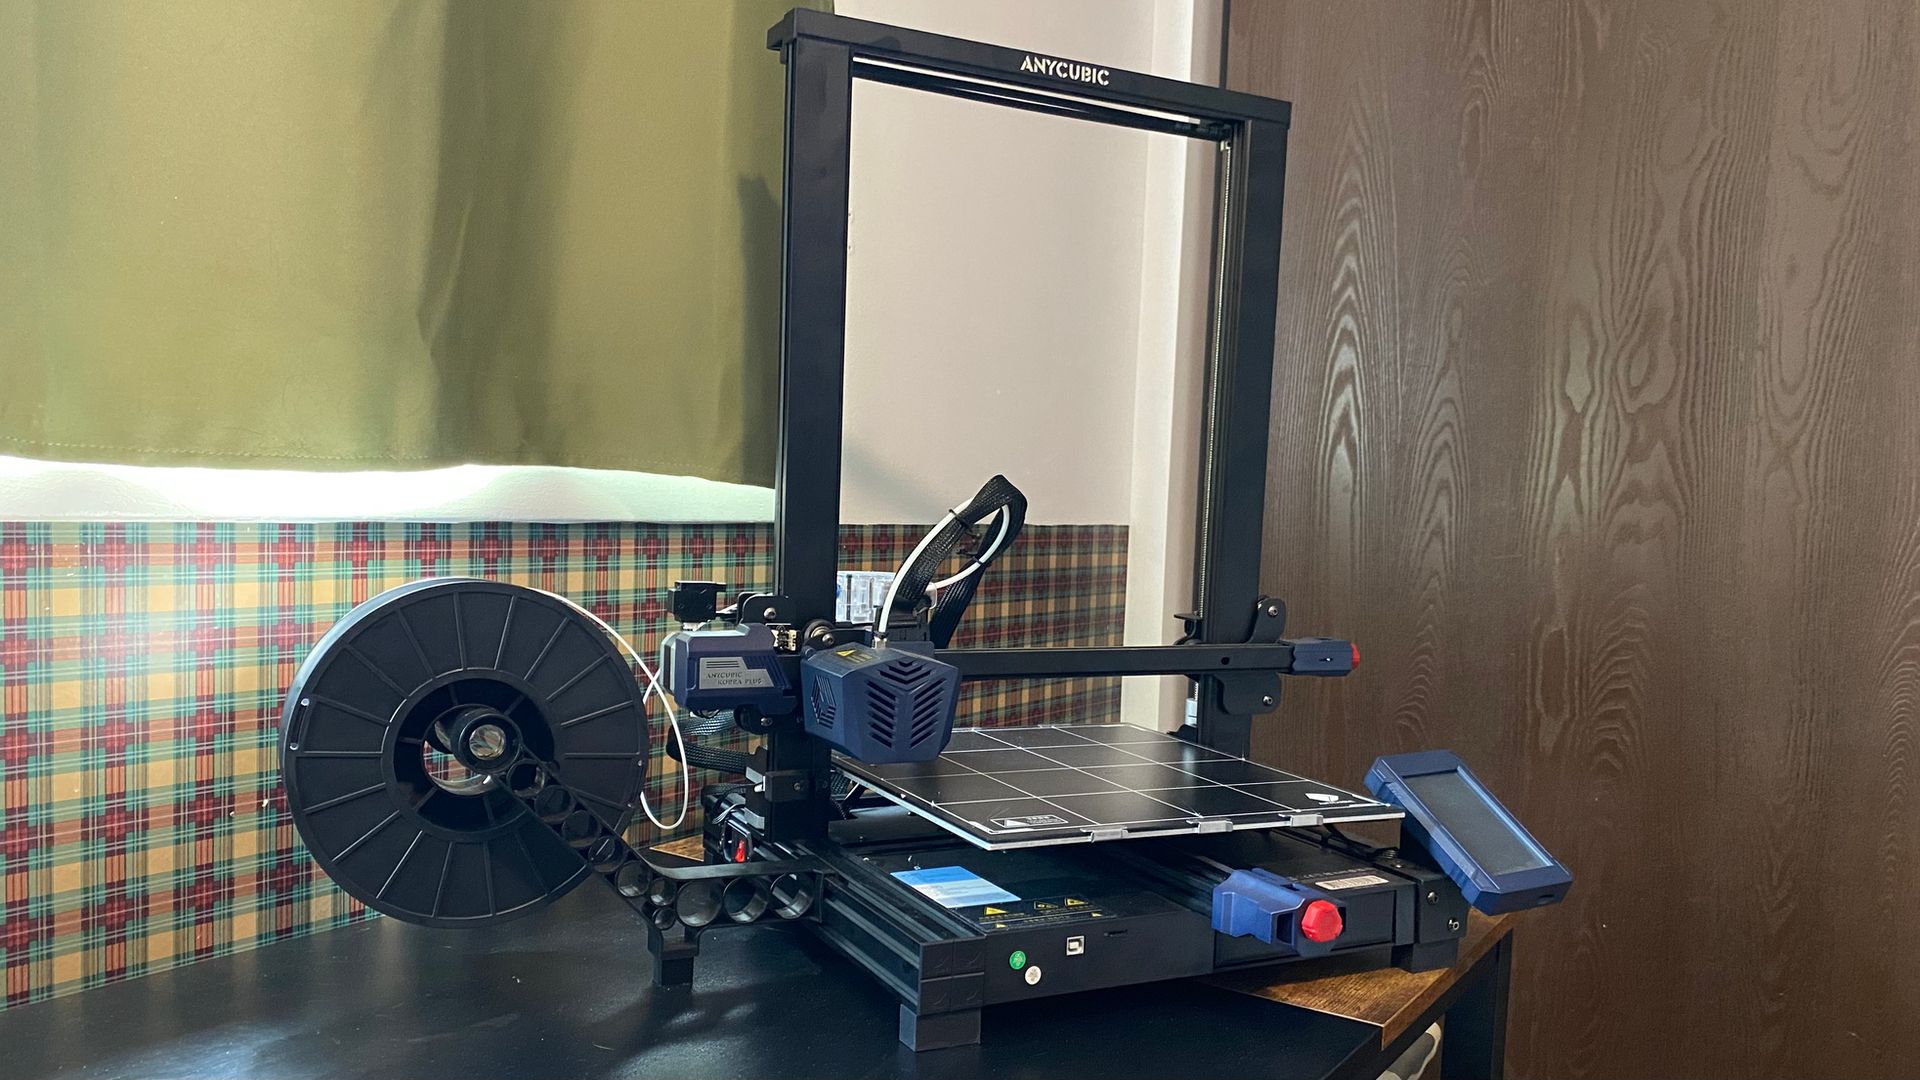 A Sneak Peek at the Anycubic Kobra Plus - 3Dnatives